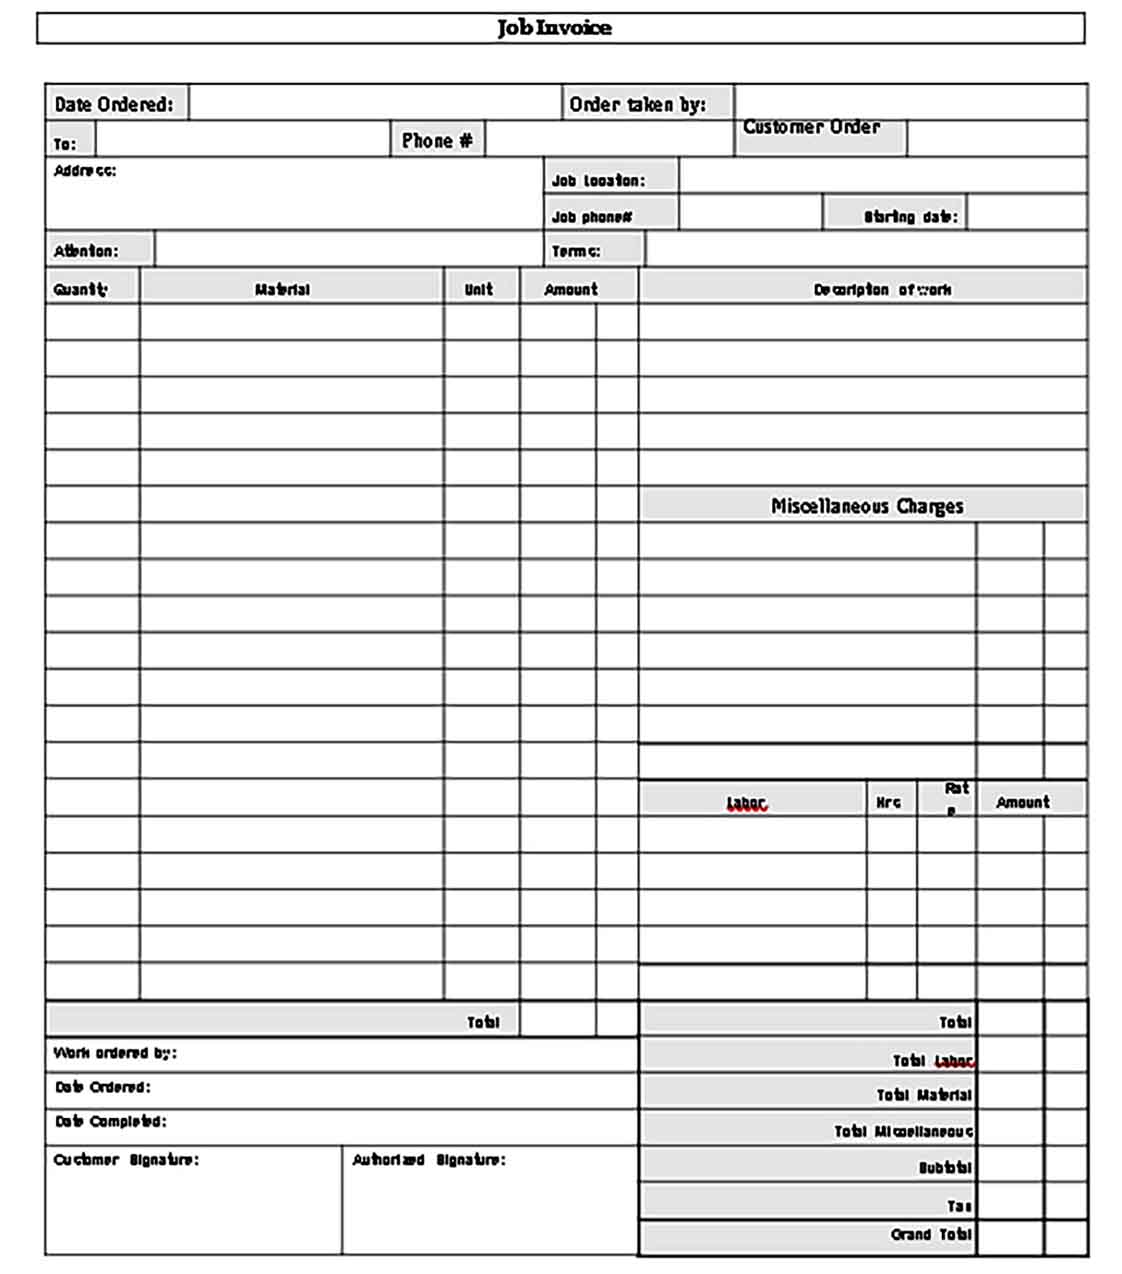 Templates Order Invoice Example